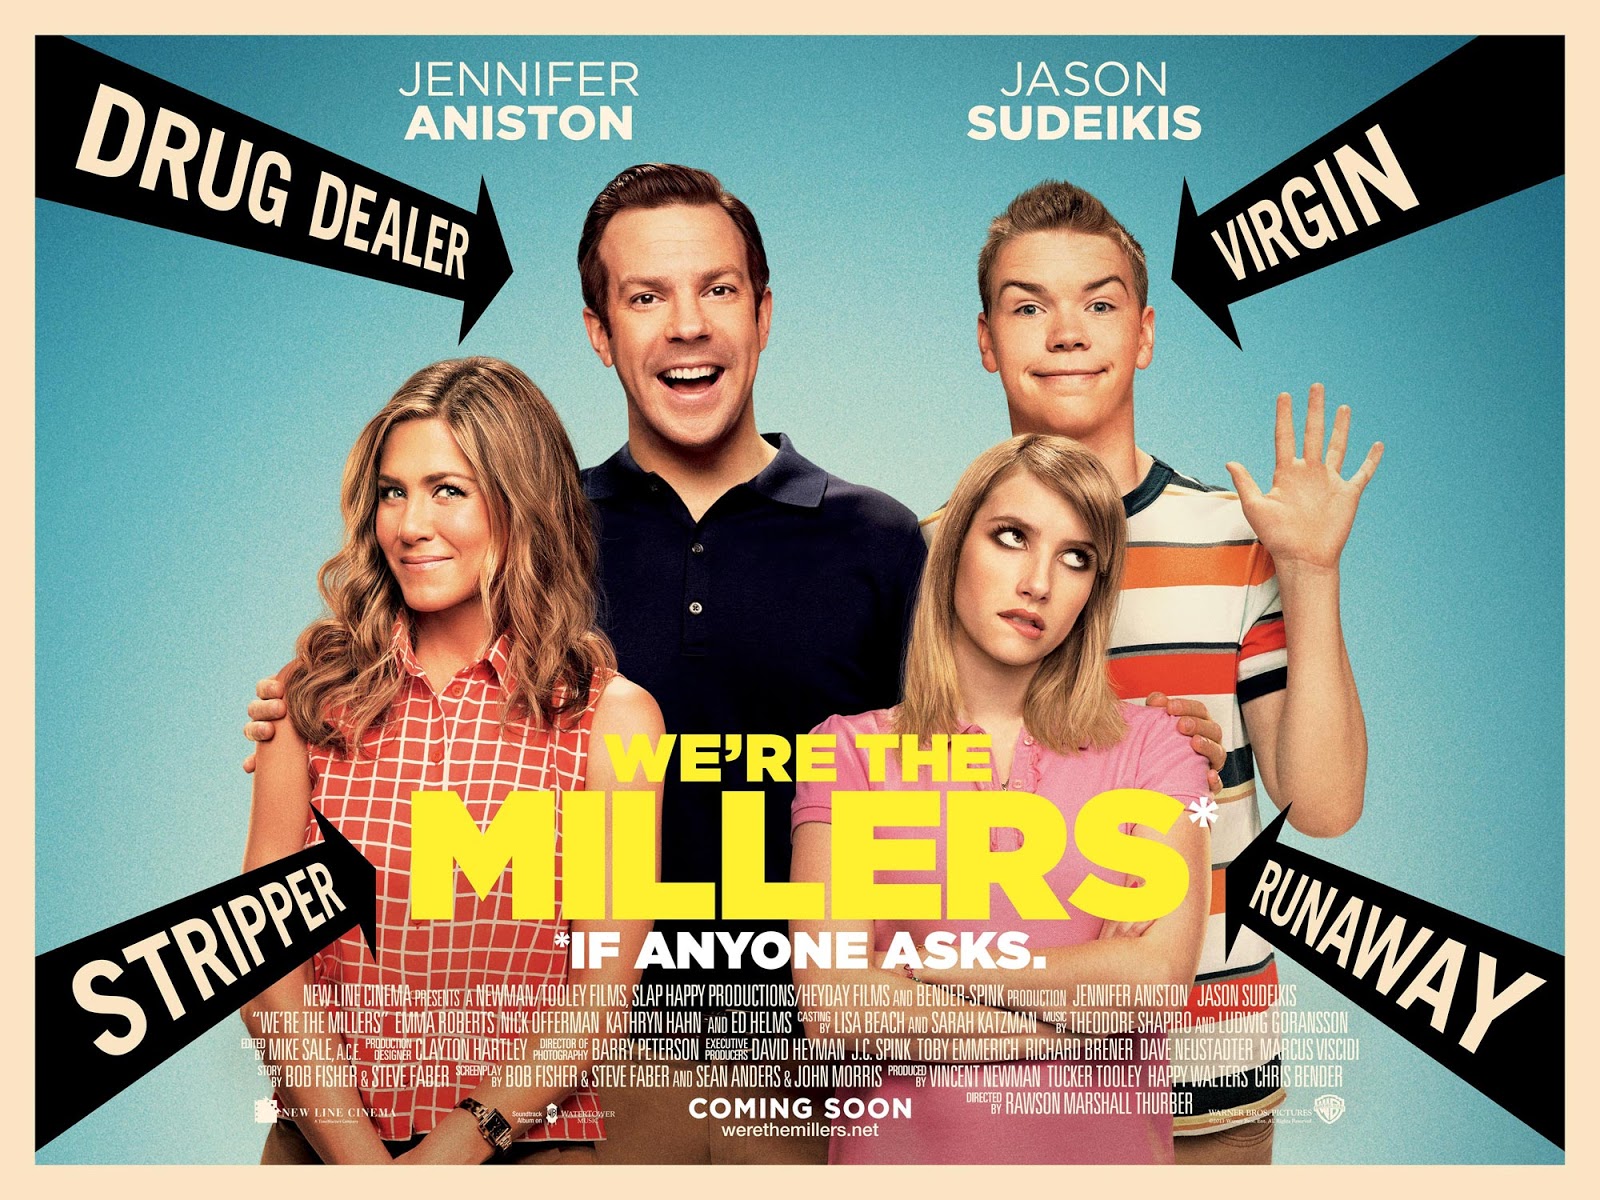 The Source We're The Millers Sequel Is Happening; Writers Hired